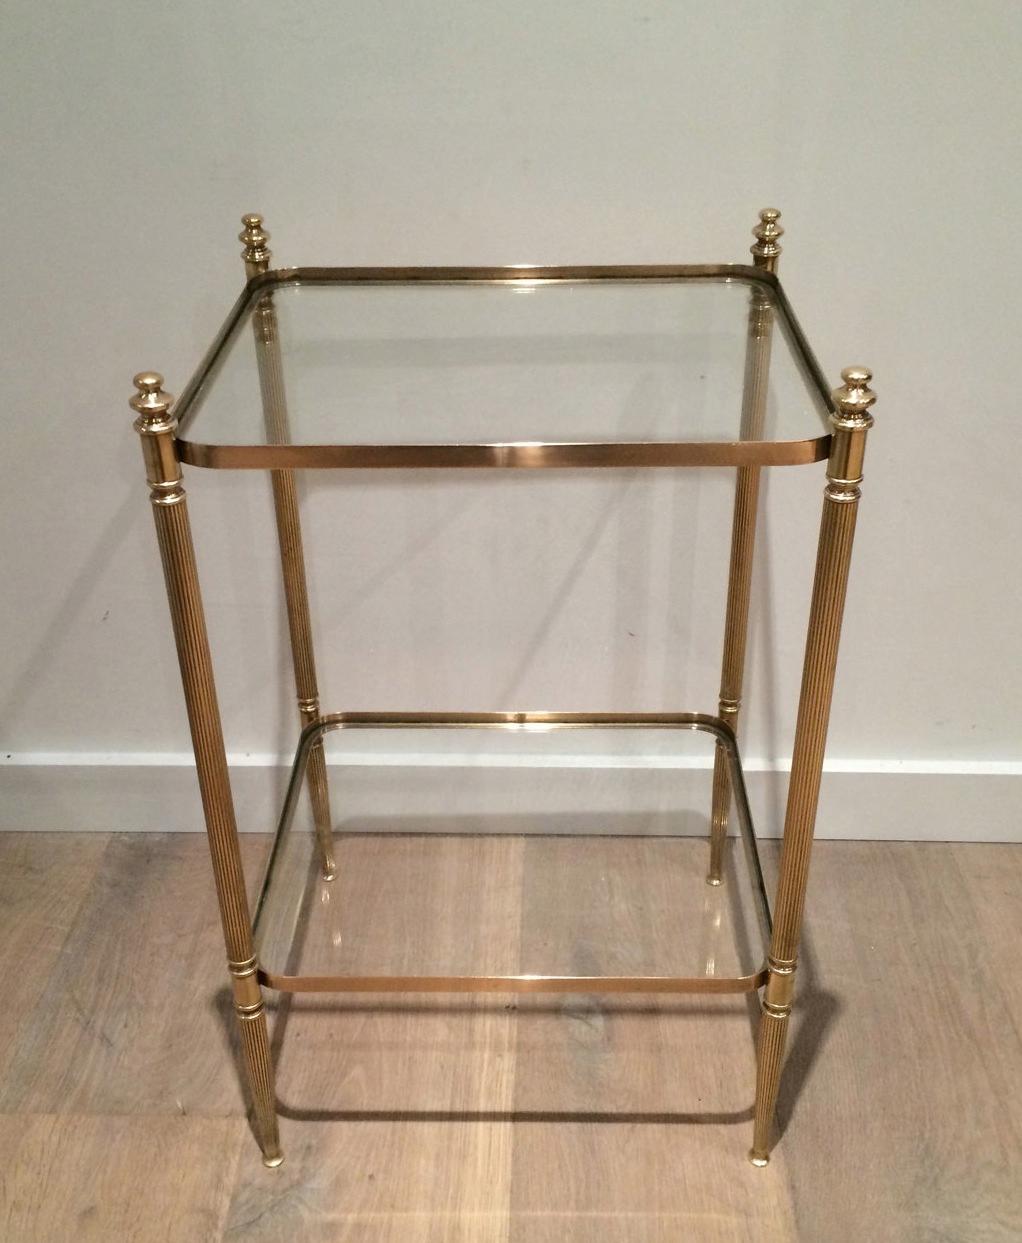 This neoclassical style pair of side tables is made of brass with 2 glass shelves. This is a French work, in the style of famous Maison Jansen, circa 1940.